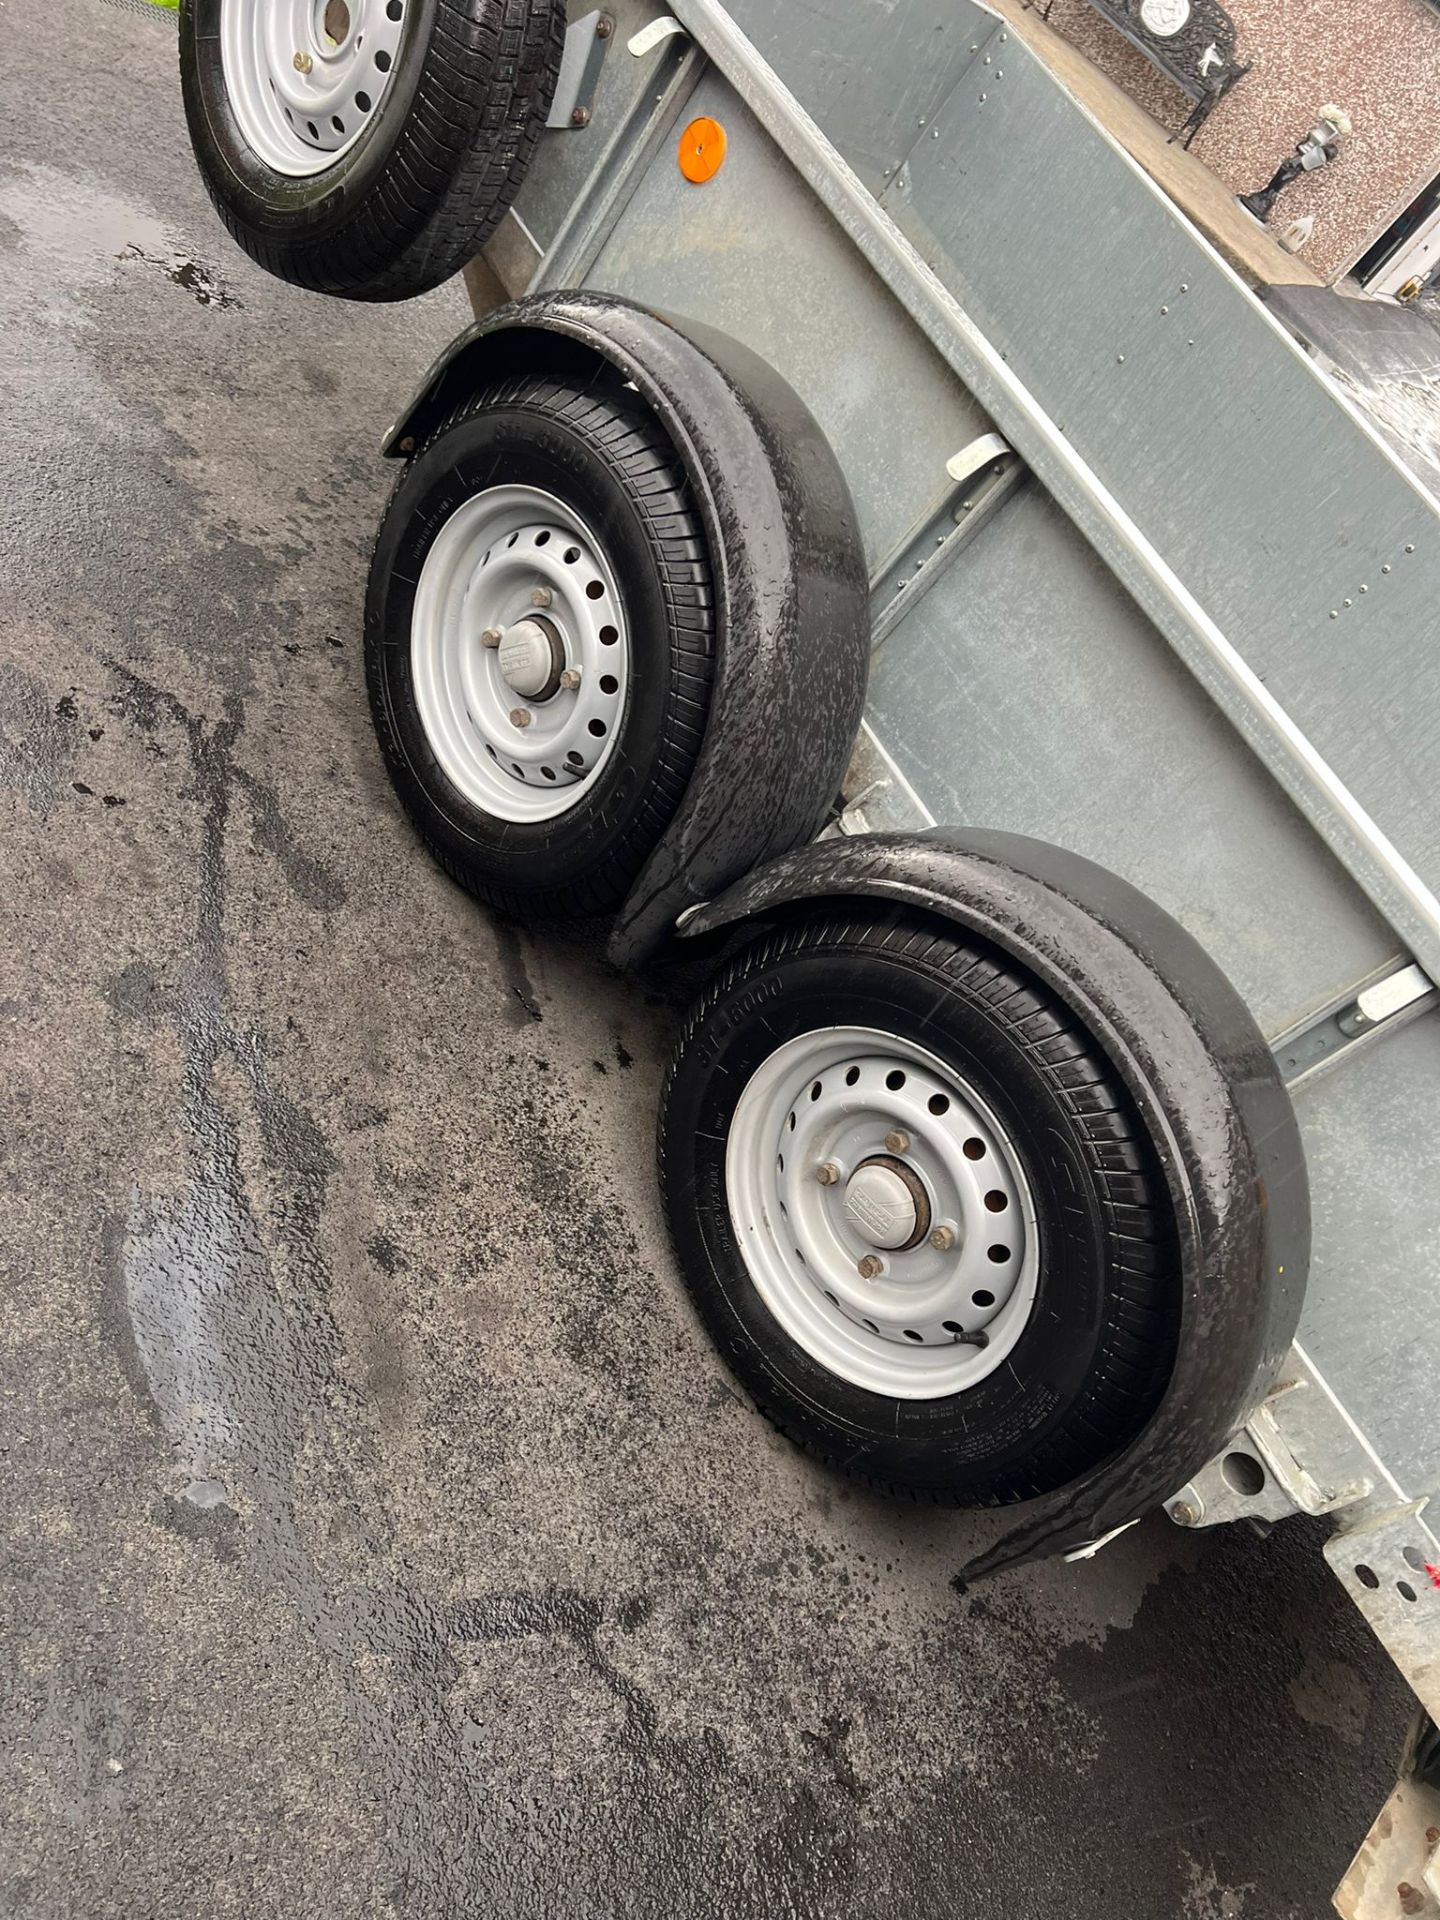 Ifor Williams GD84 Trailer - Year 2018 - Drop down ramp - good tyres all around - Image 10 of 10